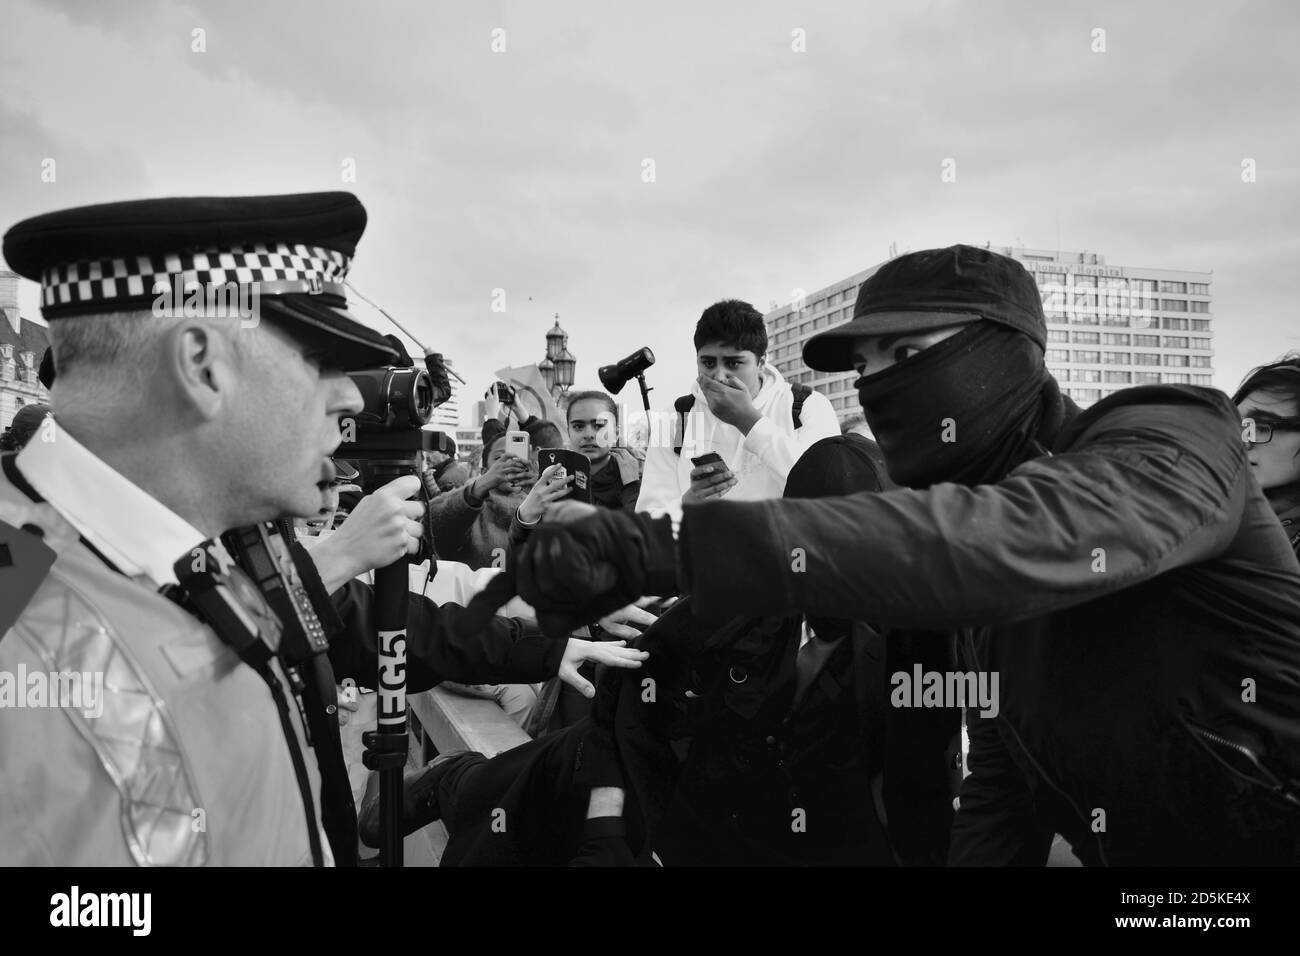 Police Fight With Protestor On Westminster Bridge During Climate Change March Stock Photo